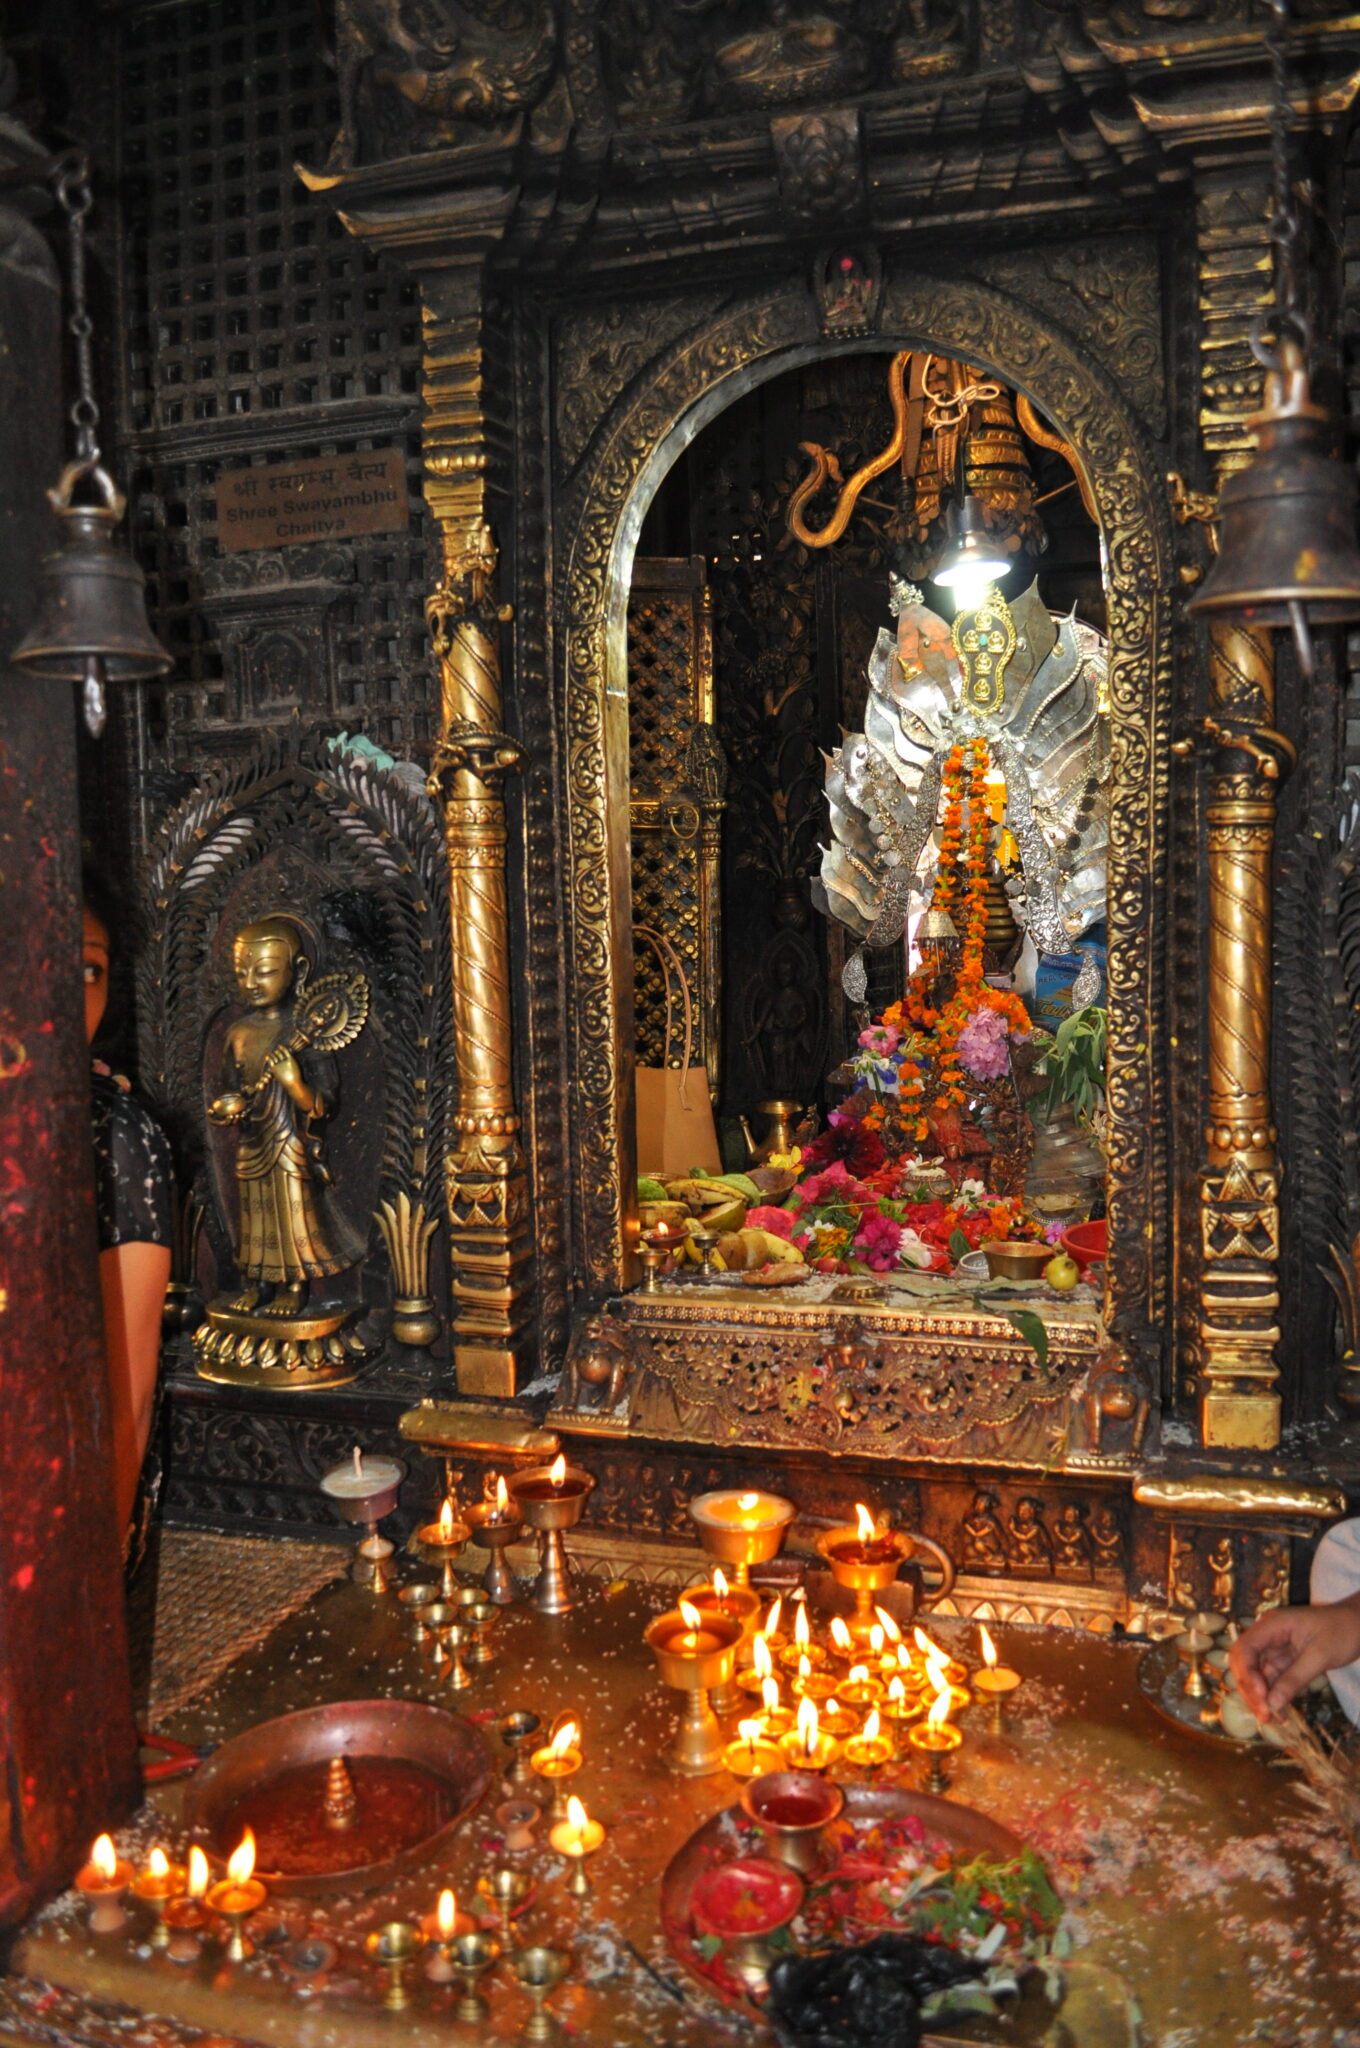 Butter lamps glow in front of columned and arched bronze niche containing devotional object adorned with garlands